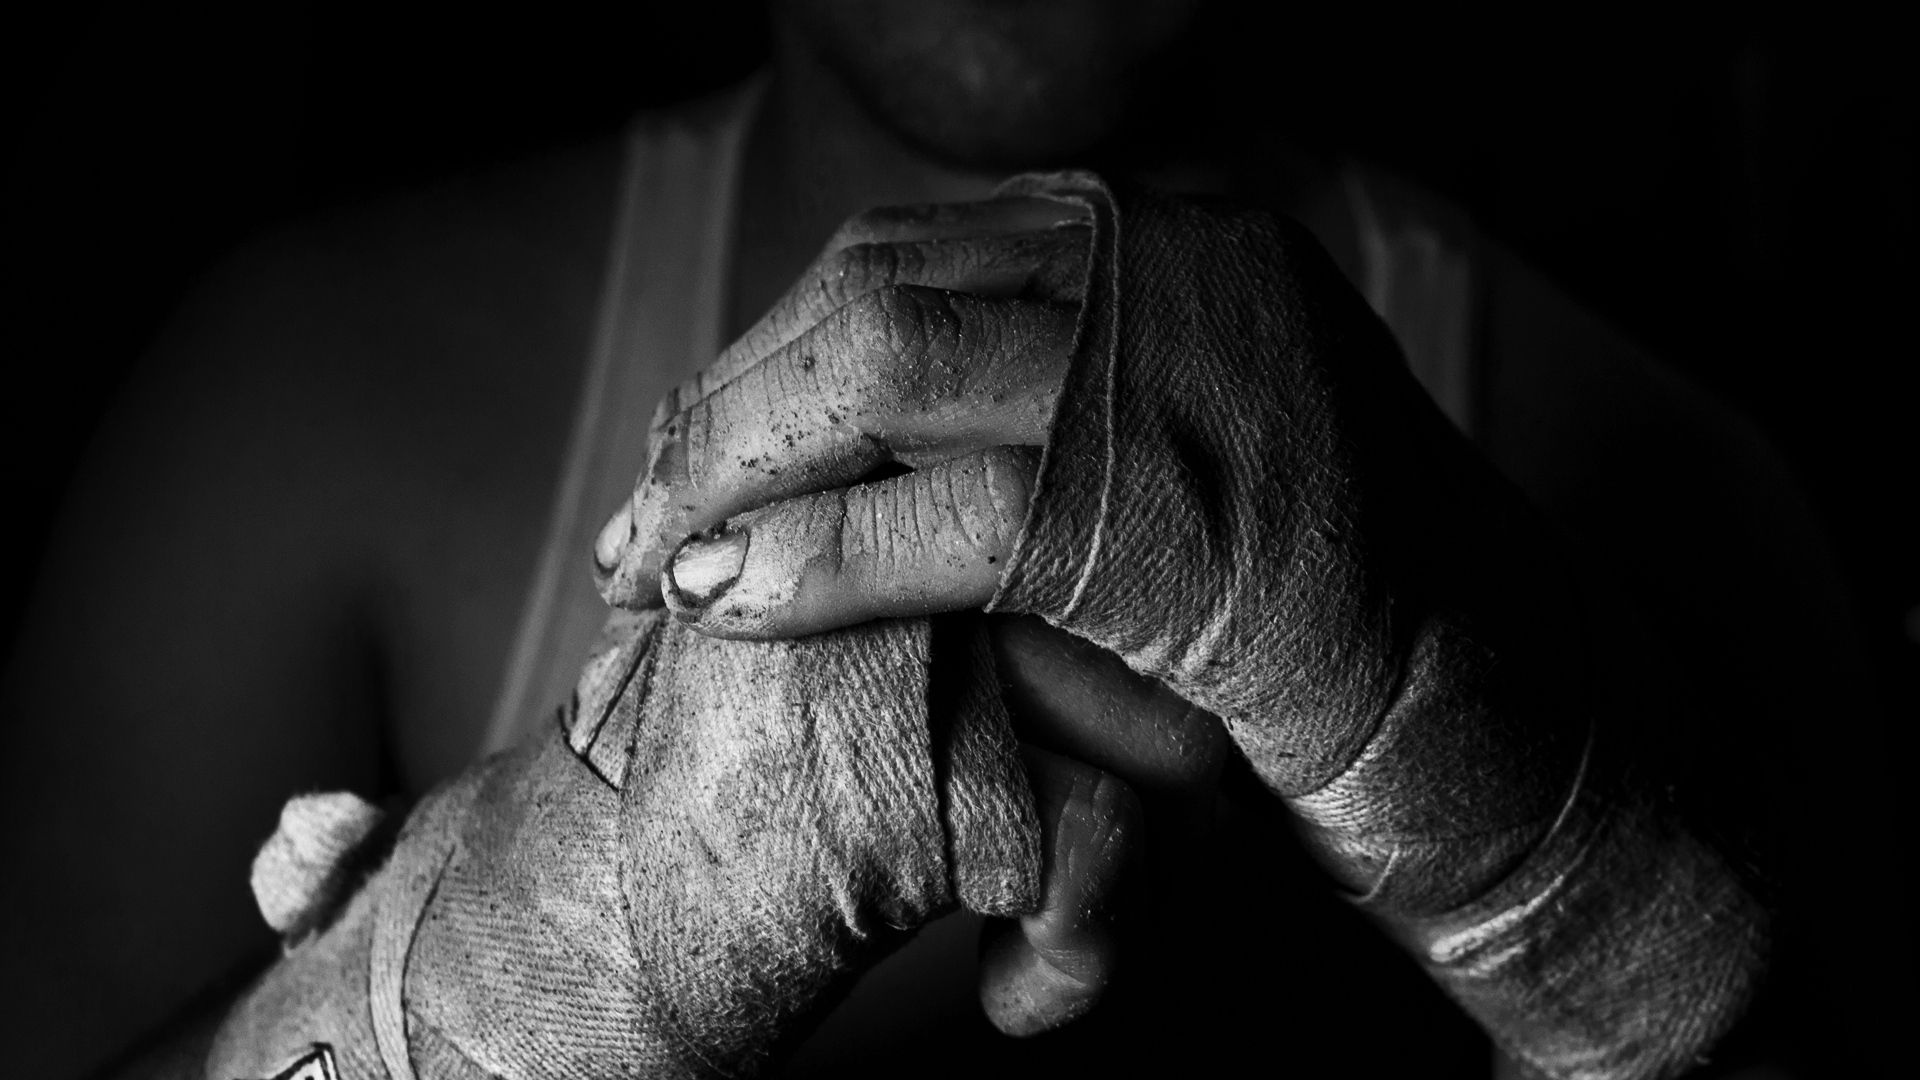 android chb, sports, hands, bw, fighter, bandages